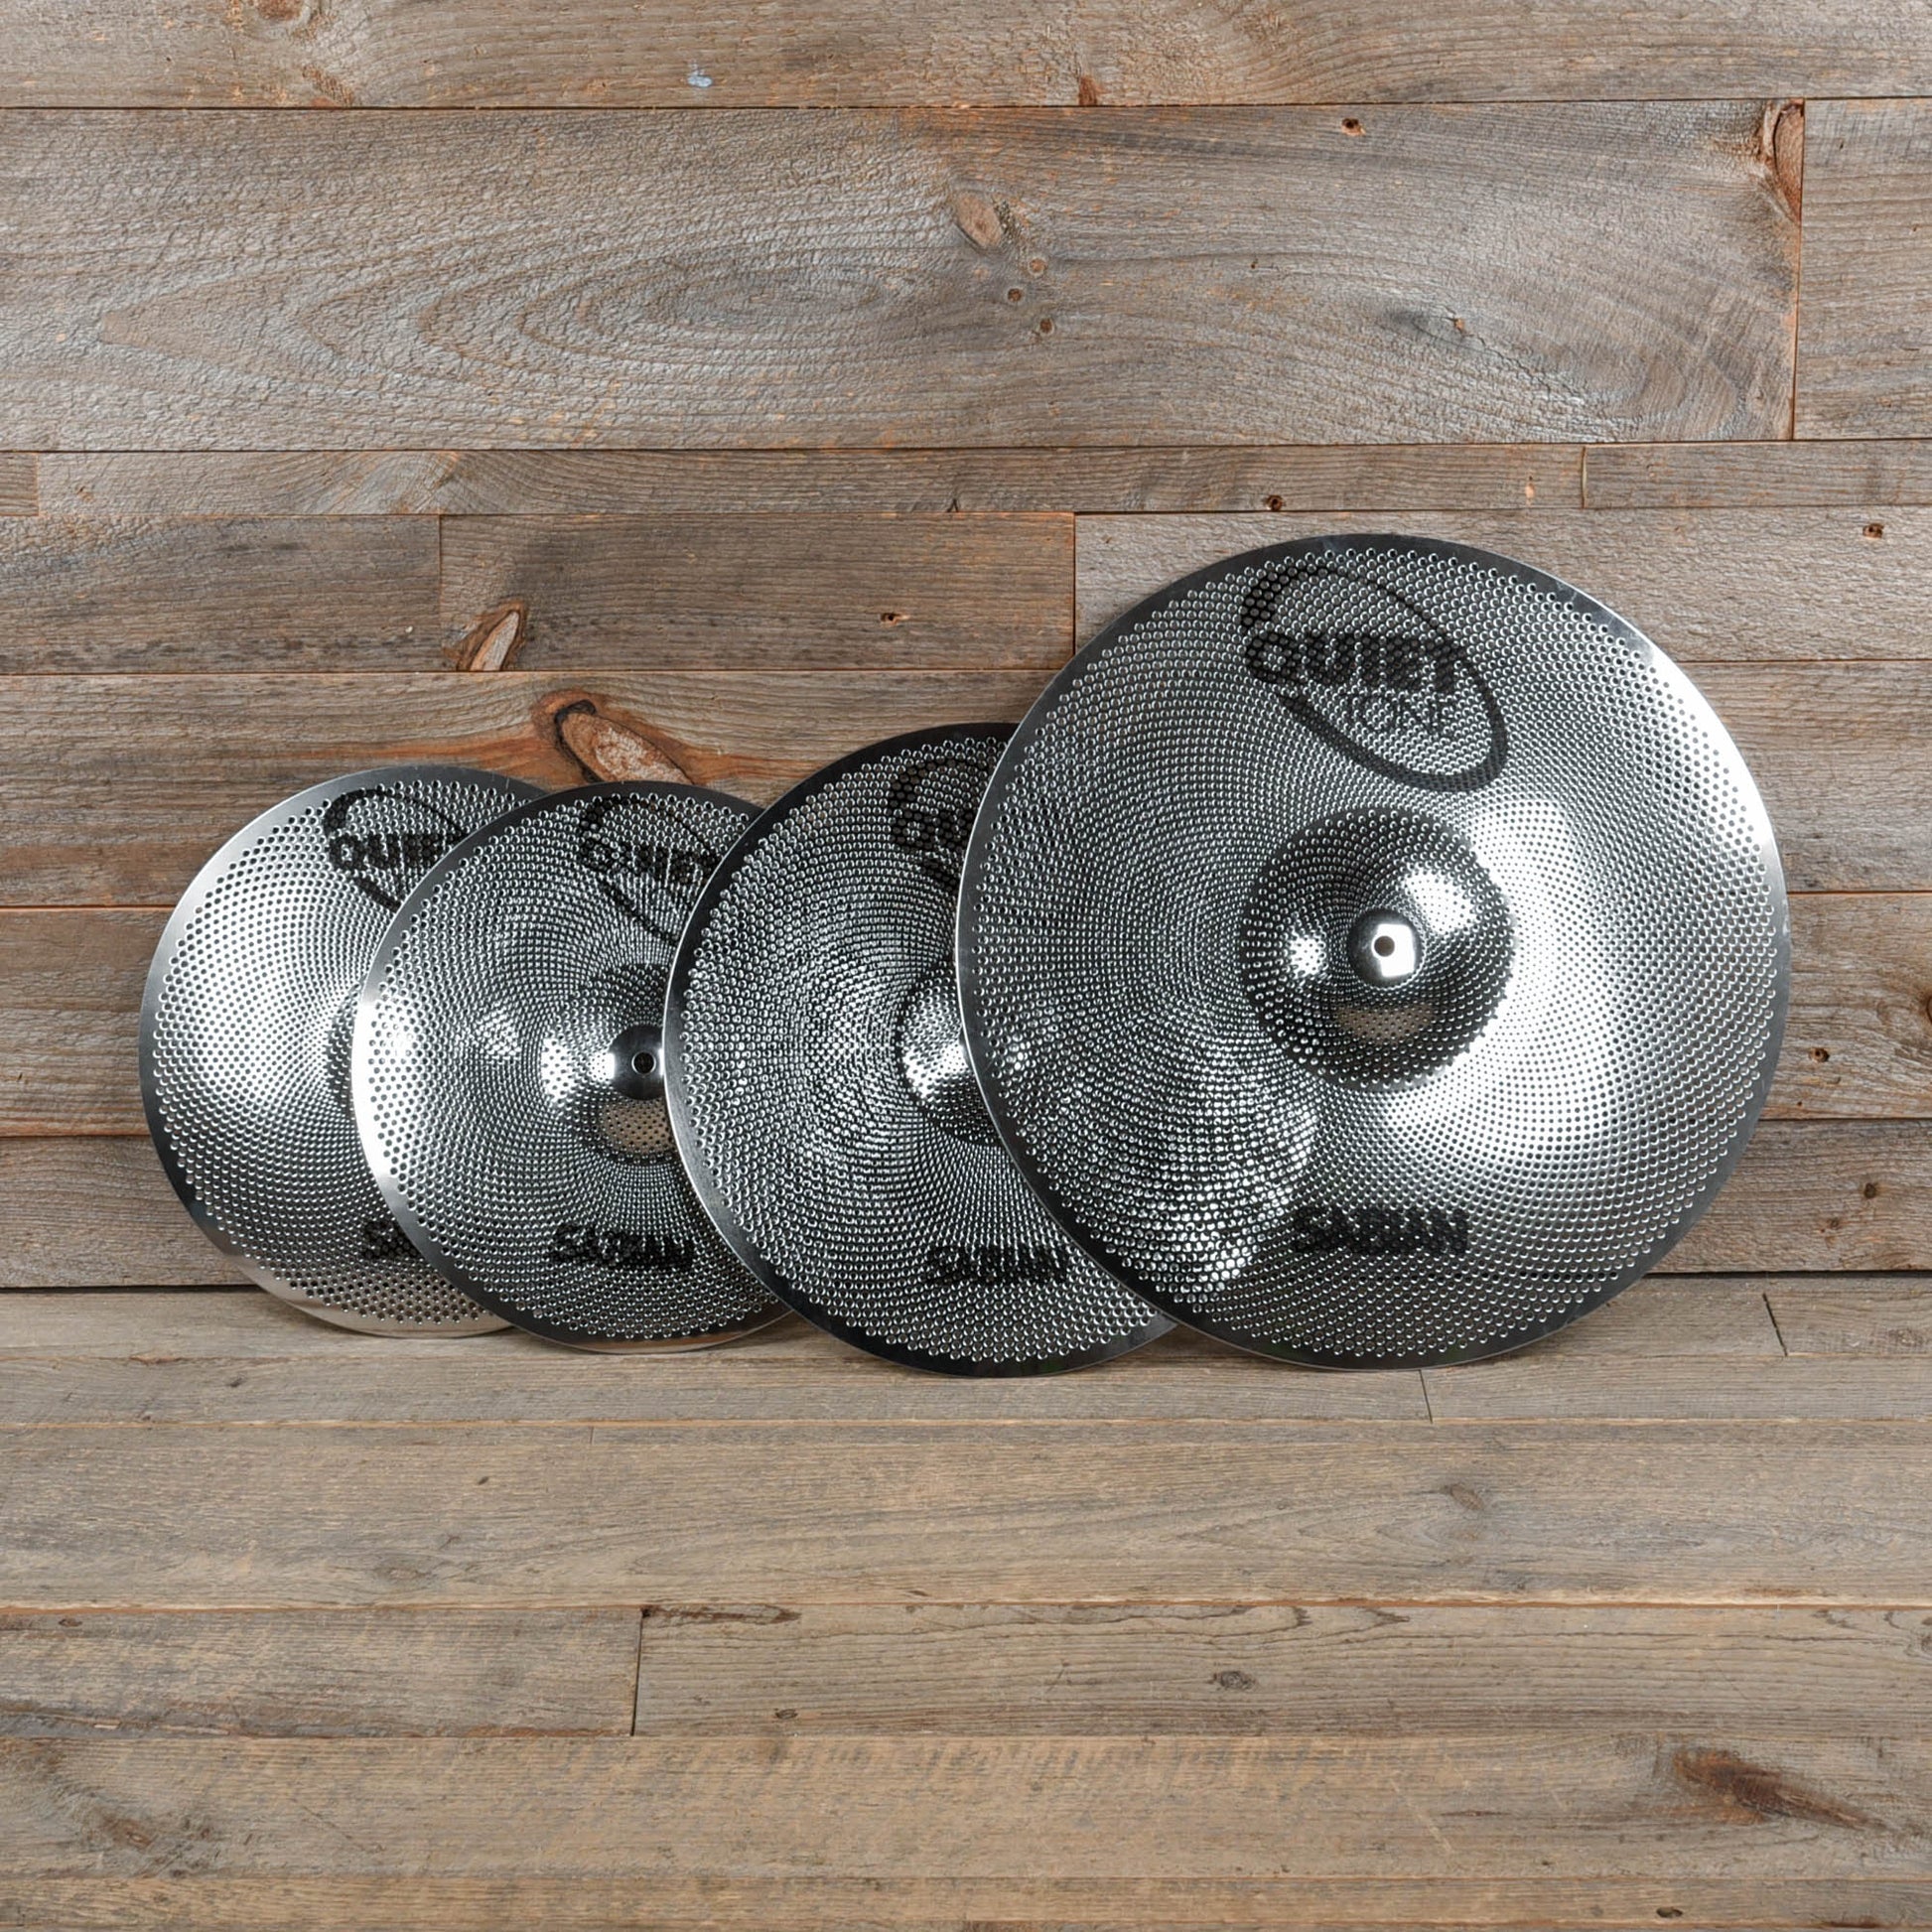 Sabian QTPC502 Quiet Tone Practice Cymbal Box Set (14/16/20) Drums and Percussion / Cymbals / Cymbal Packs